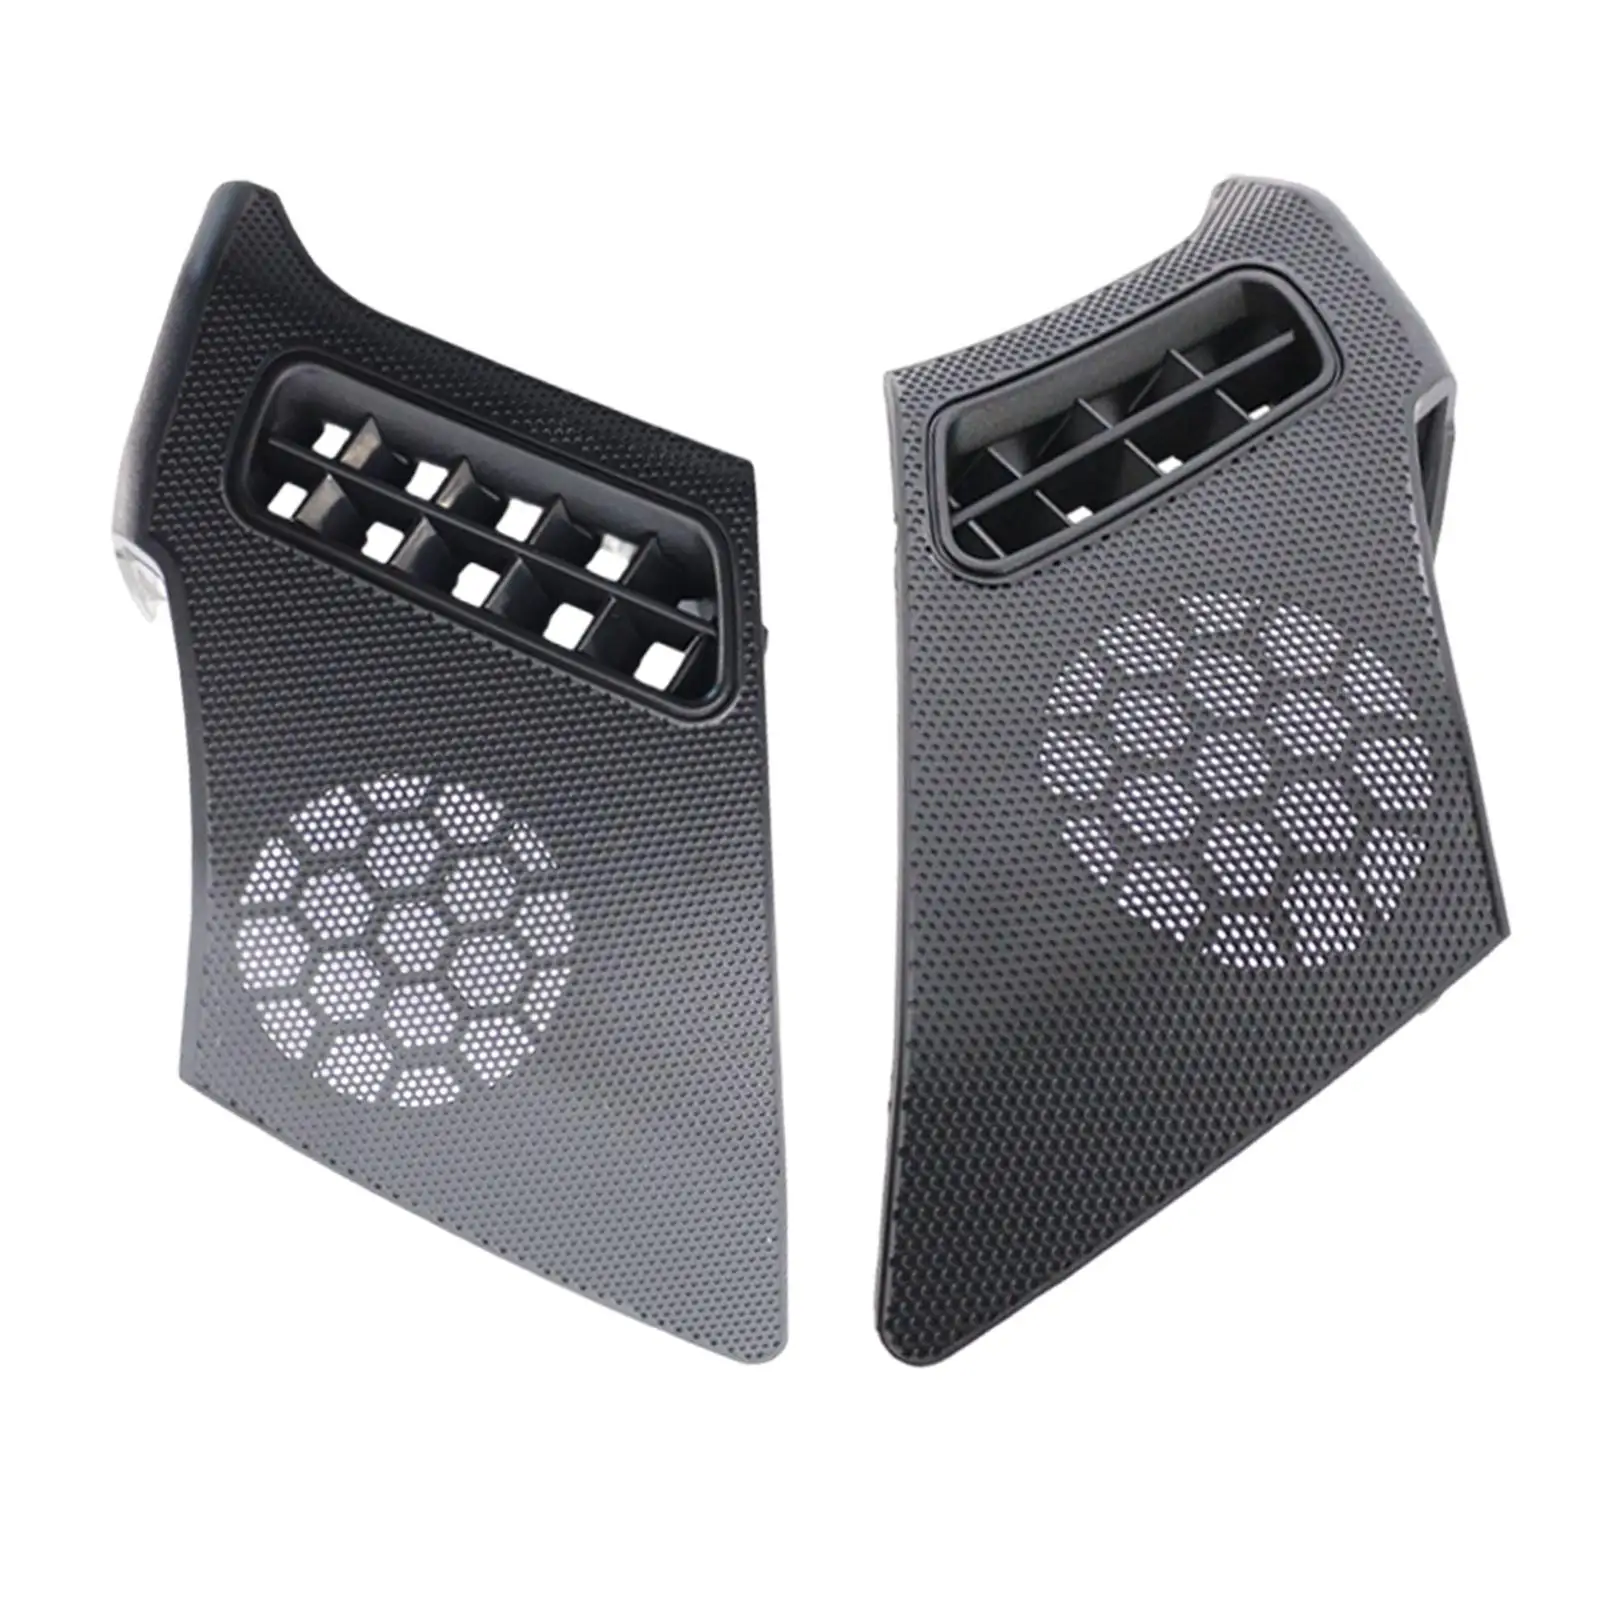 Board Air Vent Speaker Grill Covers Decorative Portable for car 